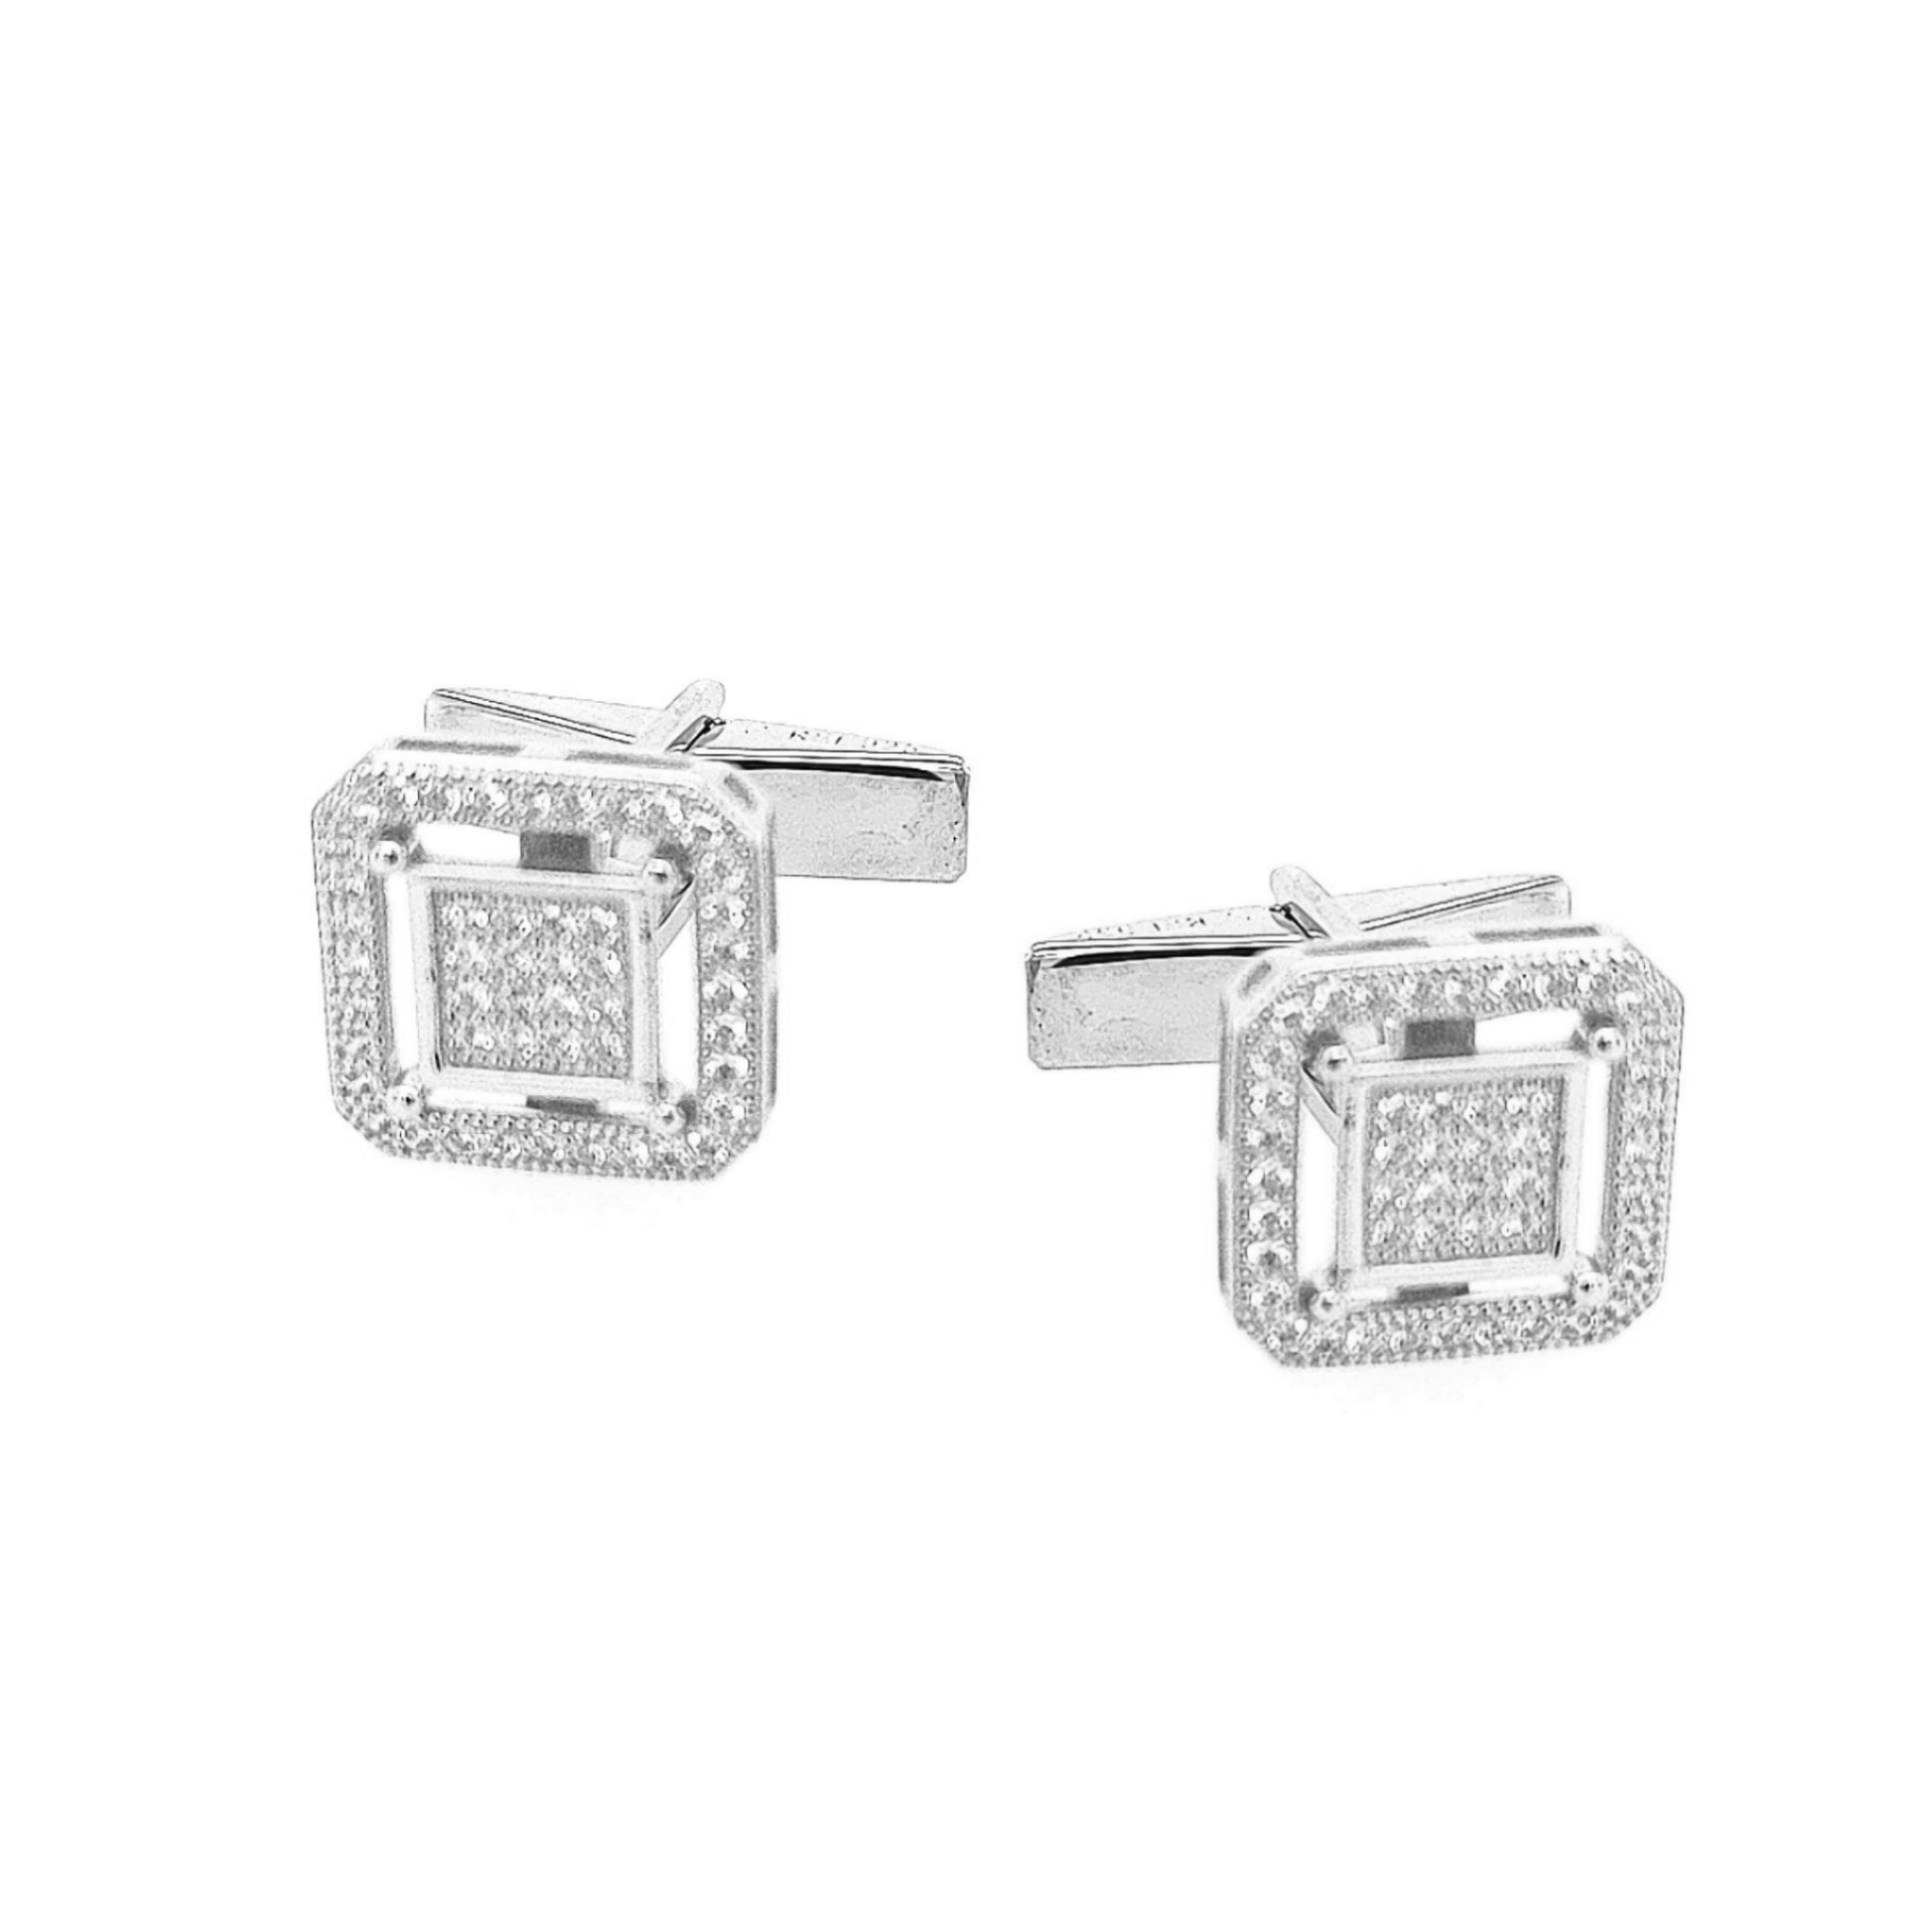 Sterling Silver Micropave Square Inside Square With Cut Corners Cufflinks - HK Jewels